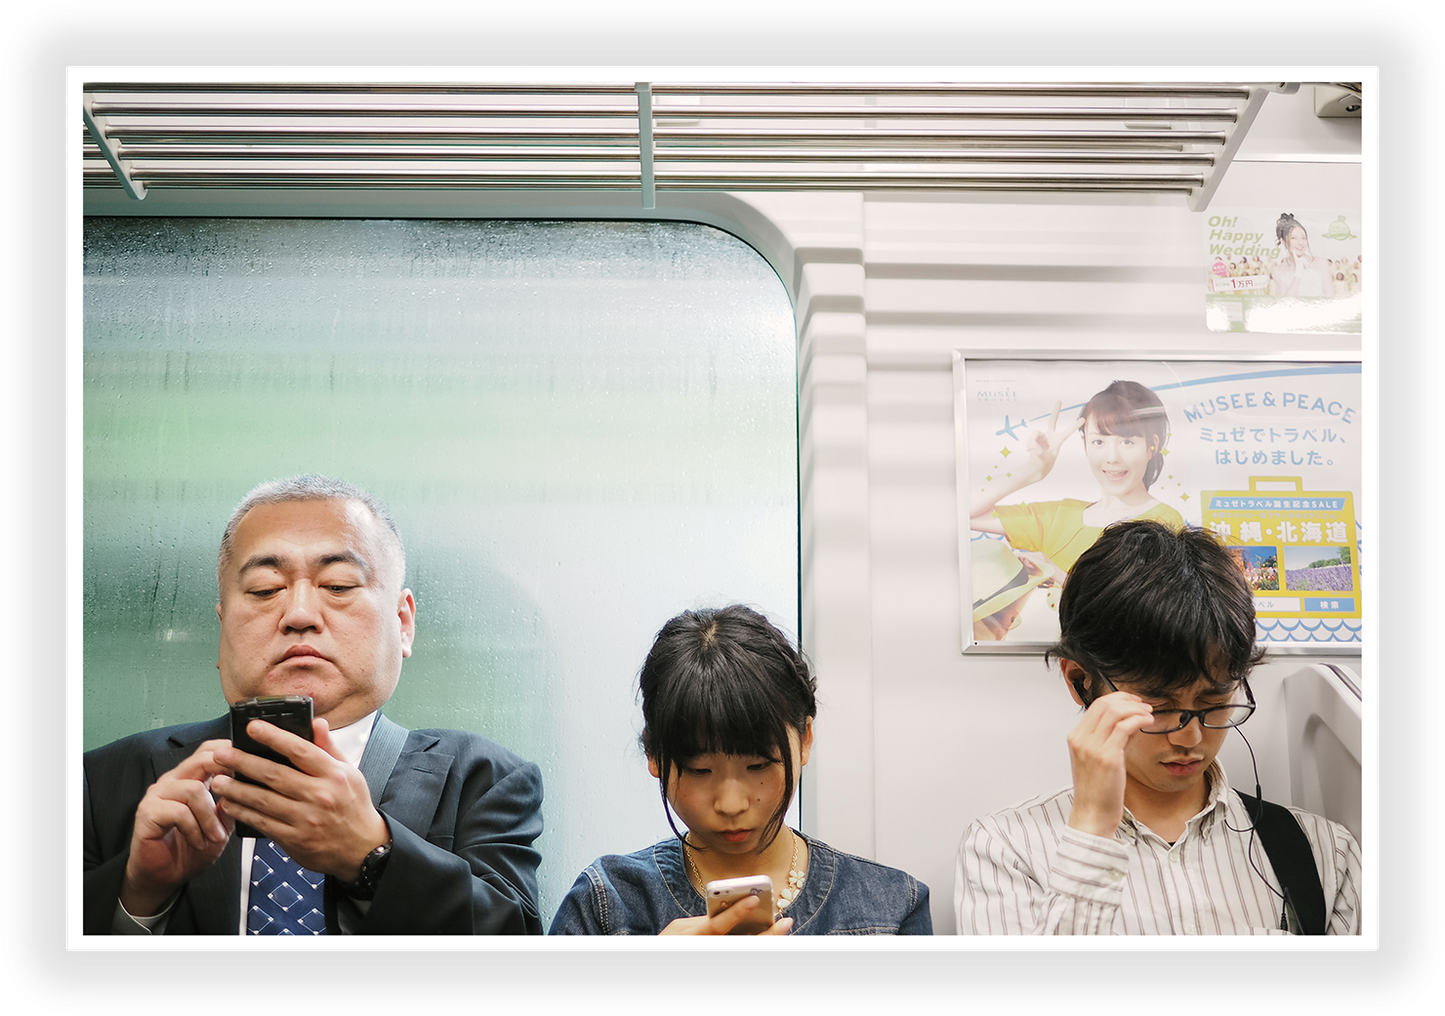 Tokyo - On the Train